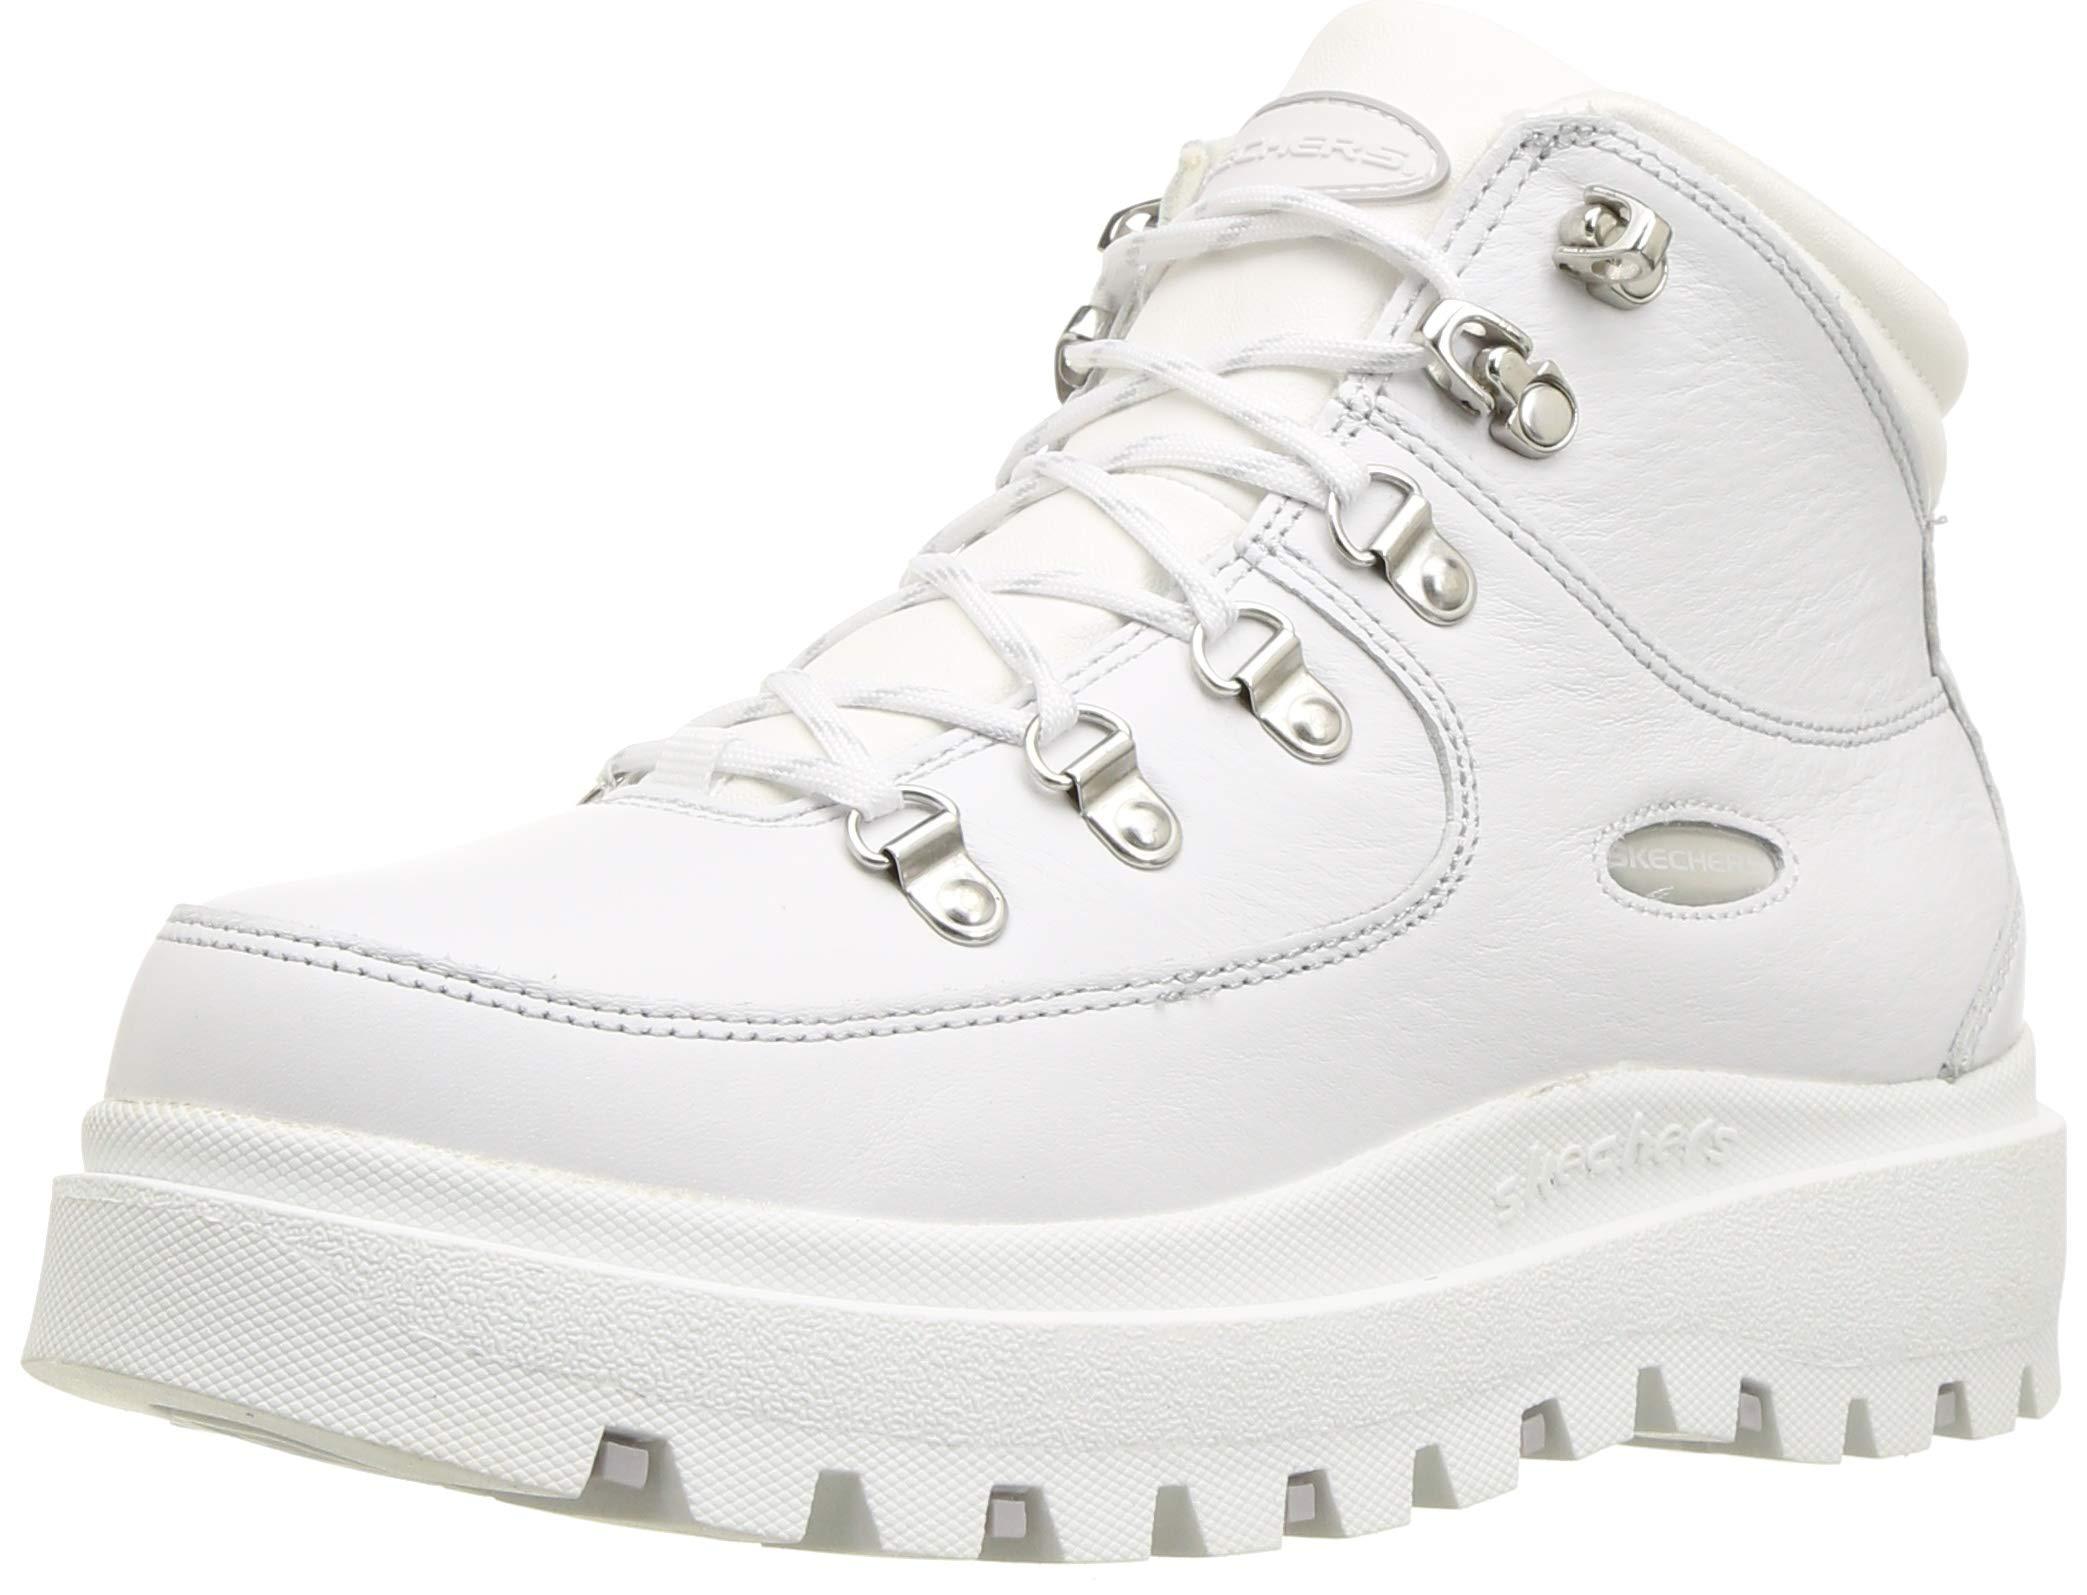 Skechers Shindigs-renegade Heart-Rugged Heritage-style 6-eye Leather Boot  Chukka in White | Lyst